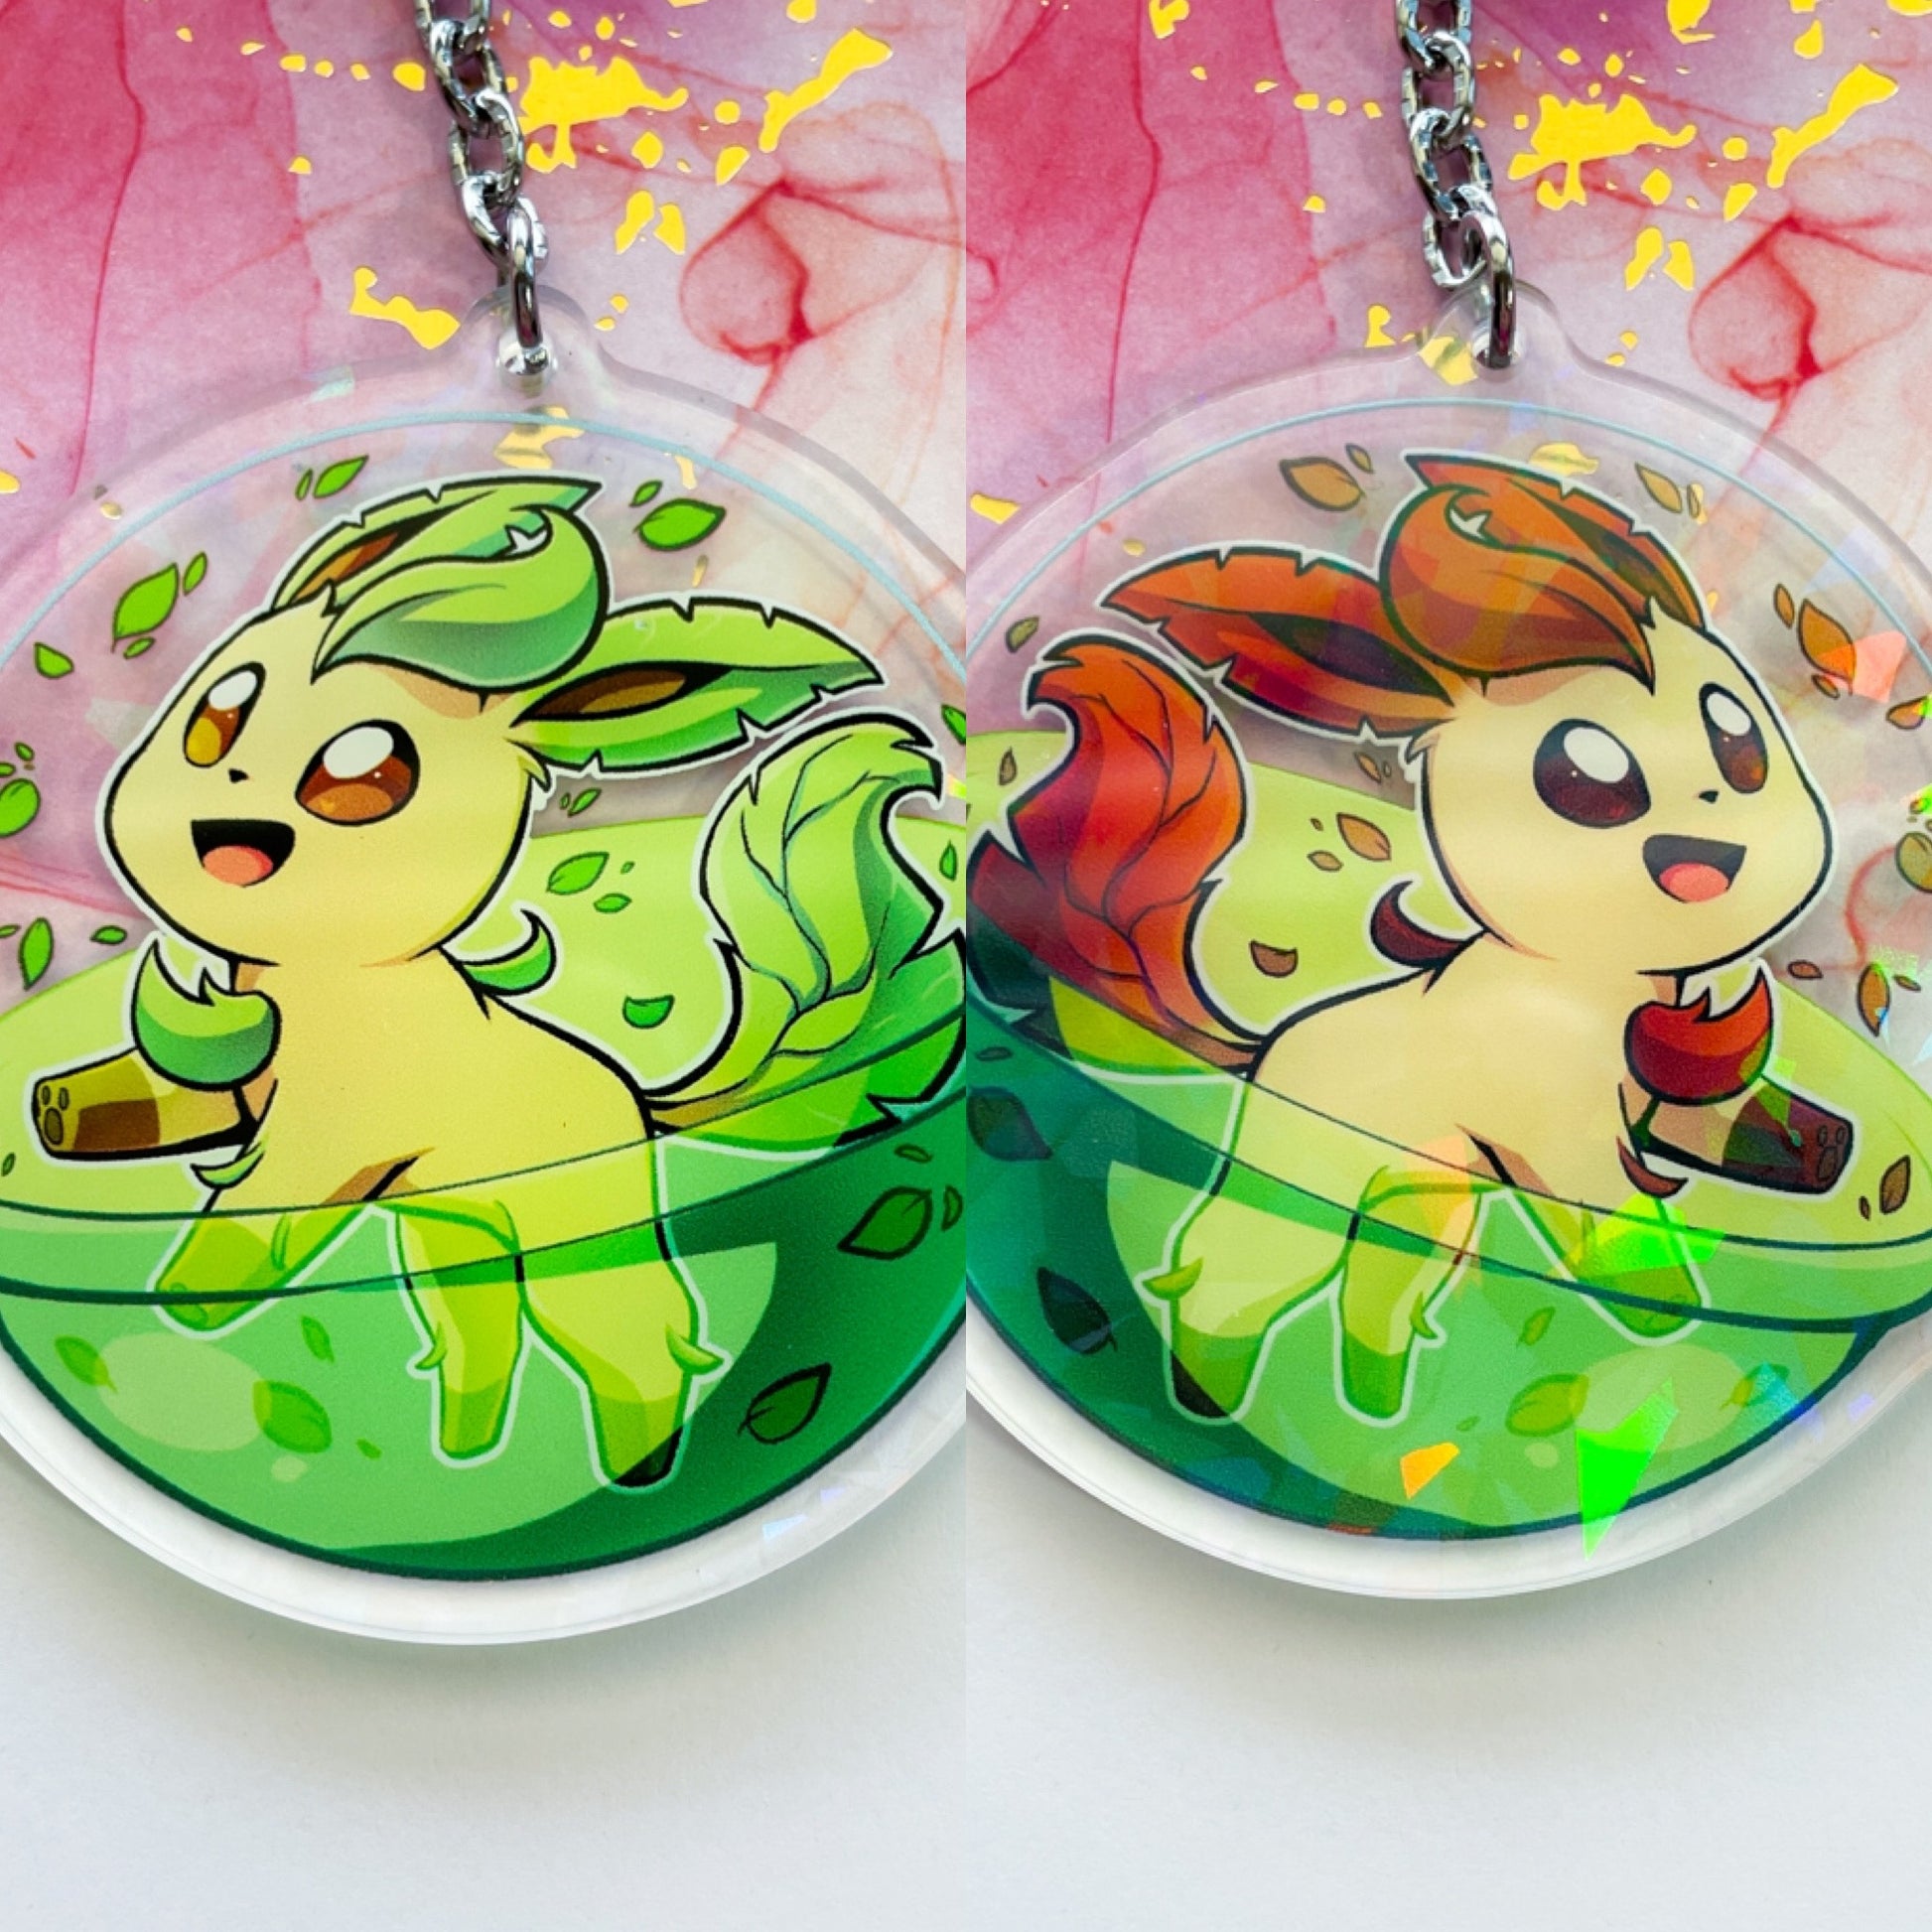 Pokemon Eeveelutions + Pallet Pals Charms (2 inch, Clear Acrylic + Glitter)